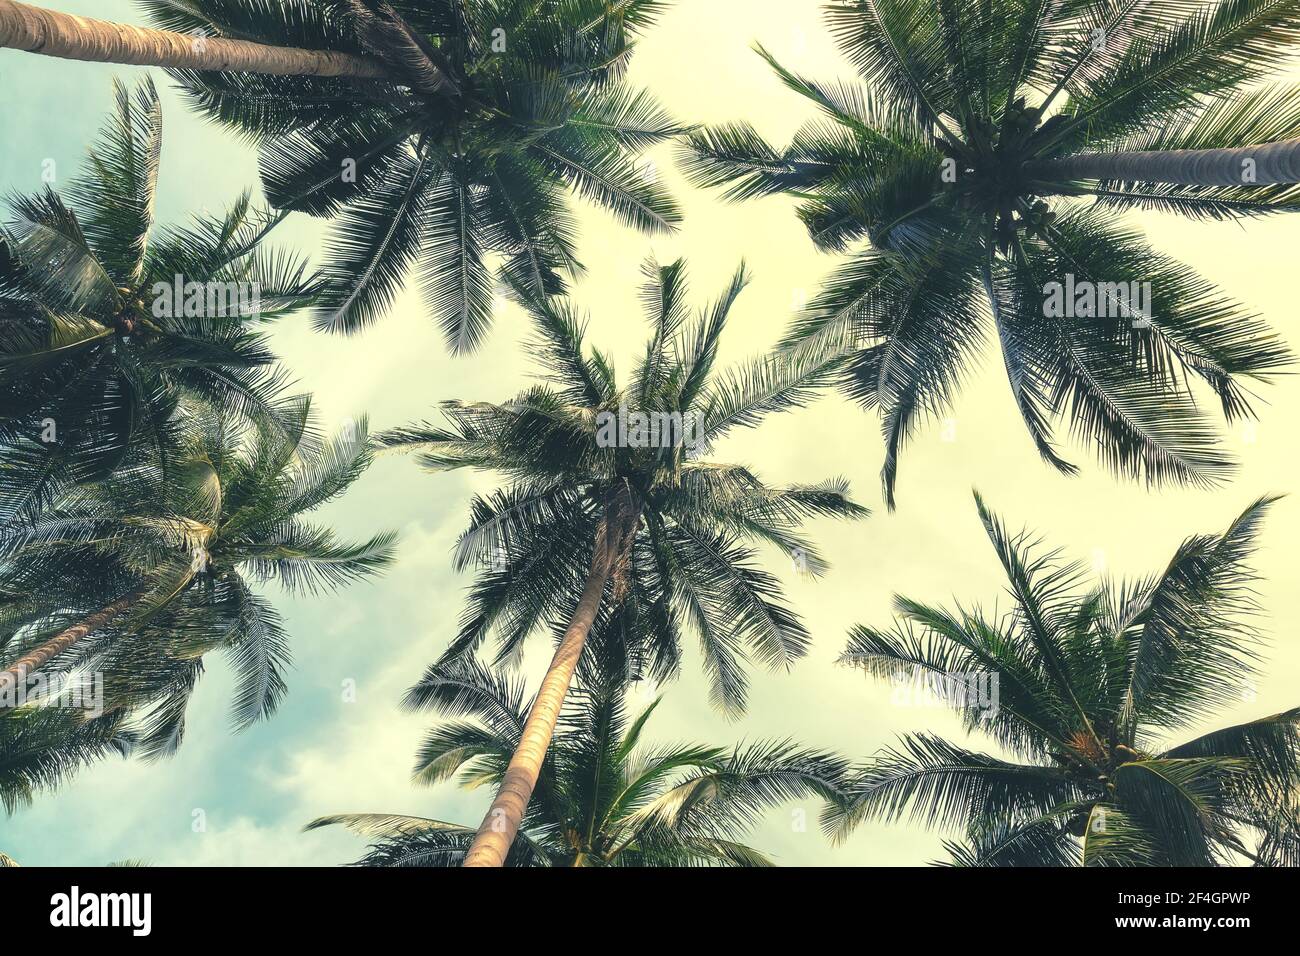 Beautiful tropical beach background. Coconut palm trees and cloud over blue sky in vintage tone. Summer vacation background concept. Stock Photo